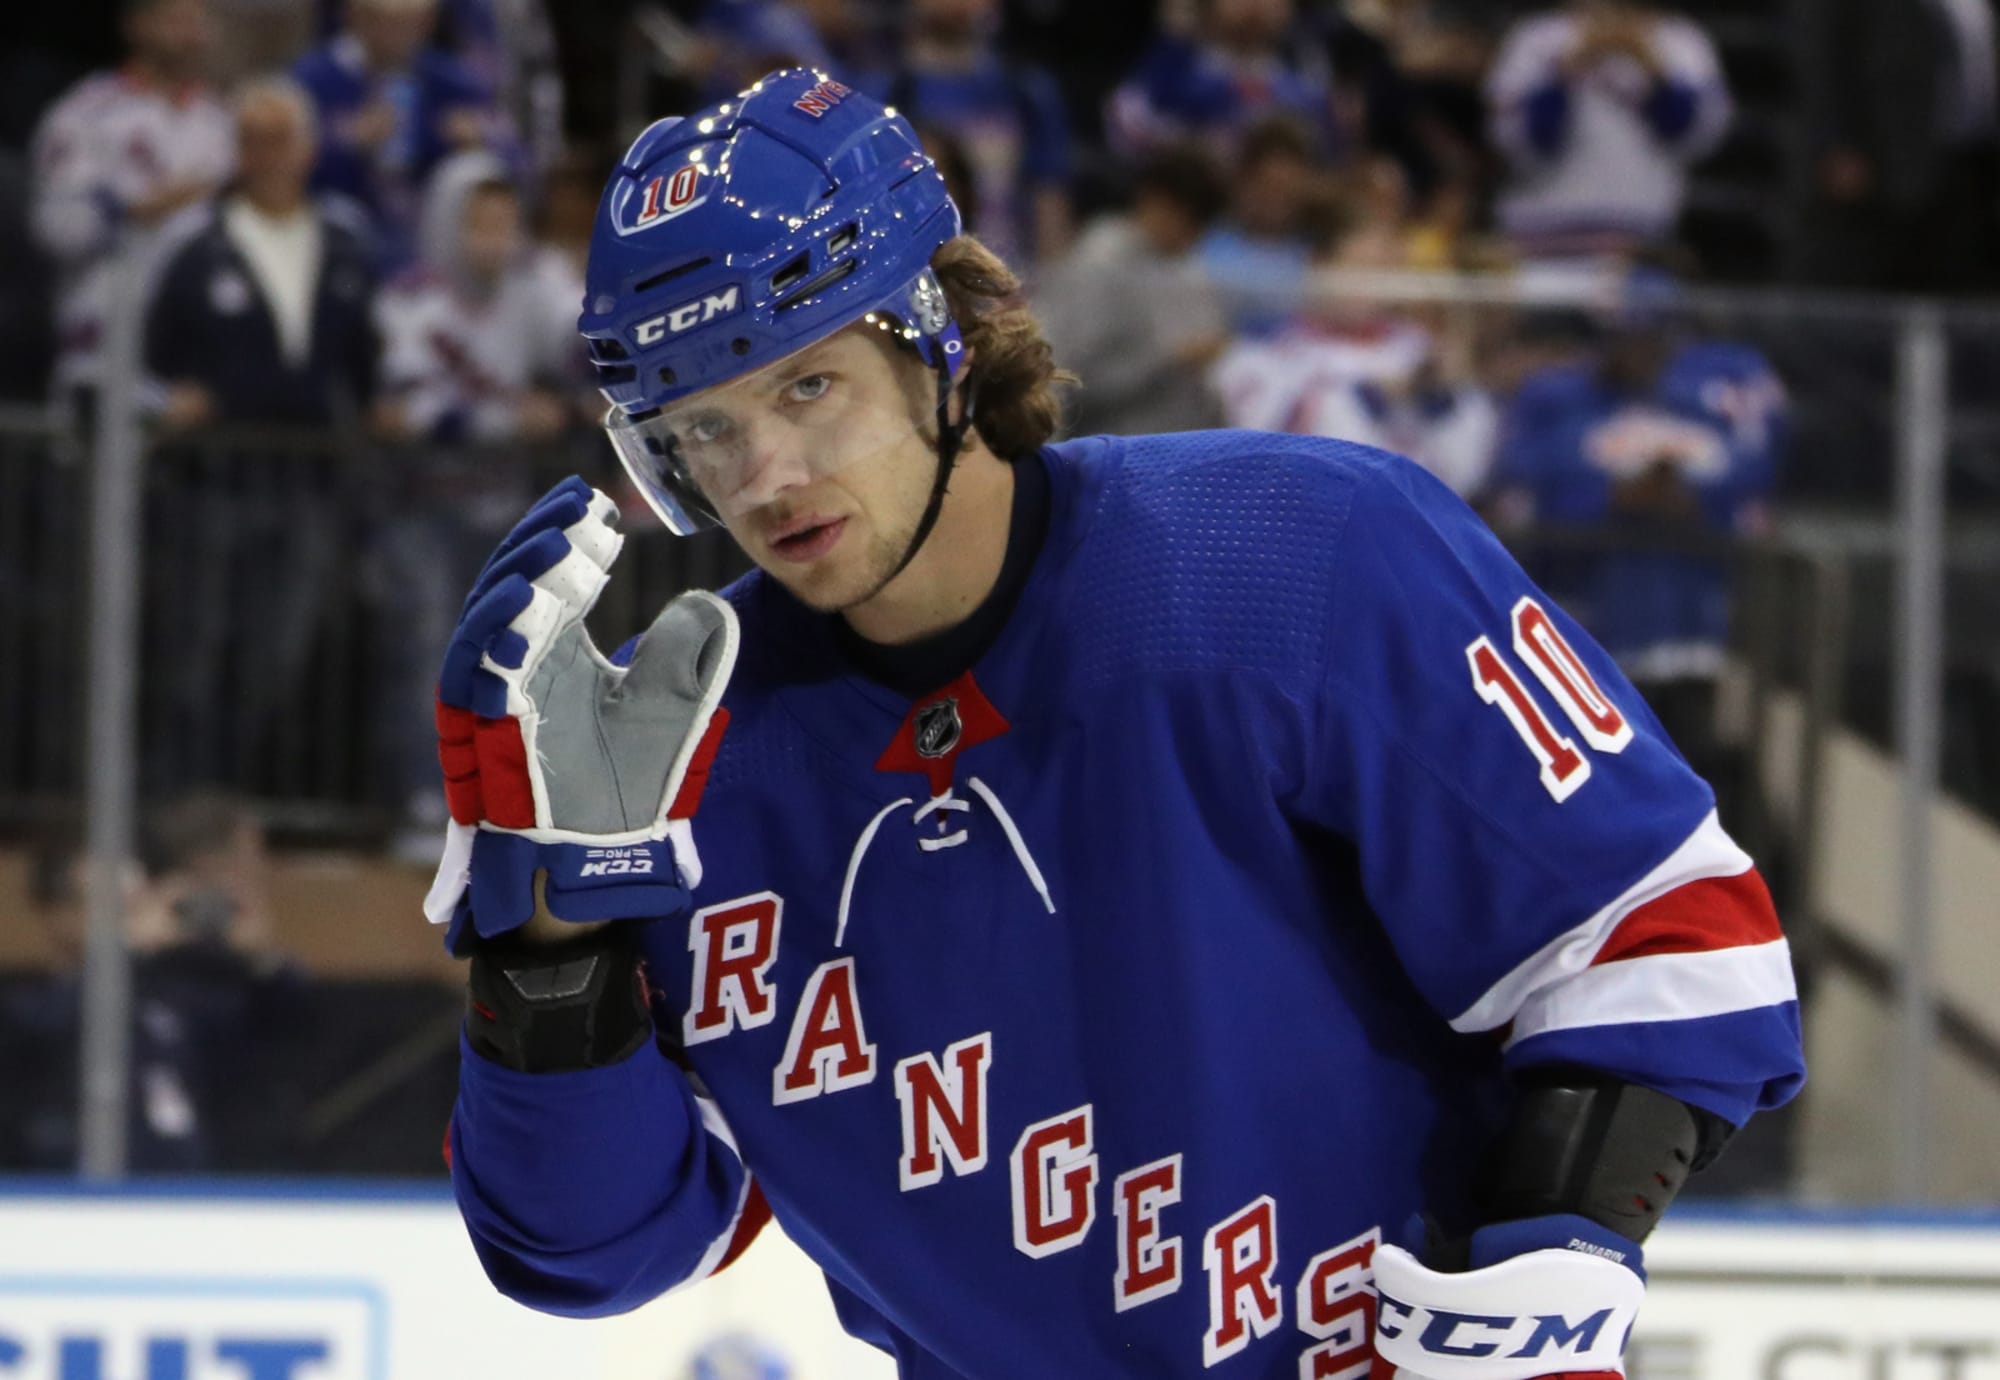 BCBS For 2/24: All The Latest Updates on the Panarin Story; Nazarov Full of  You Know What, Panarin's Expected Return, A Complete Rangers vs Flyers  Preview; Full Line-Ups & Goalies Announced, DQ's